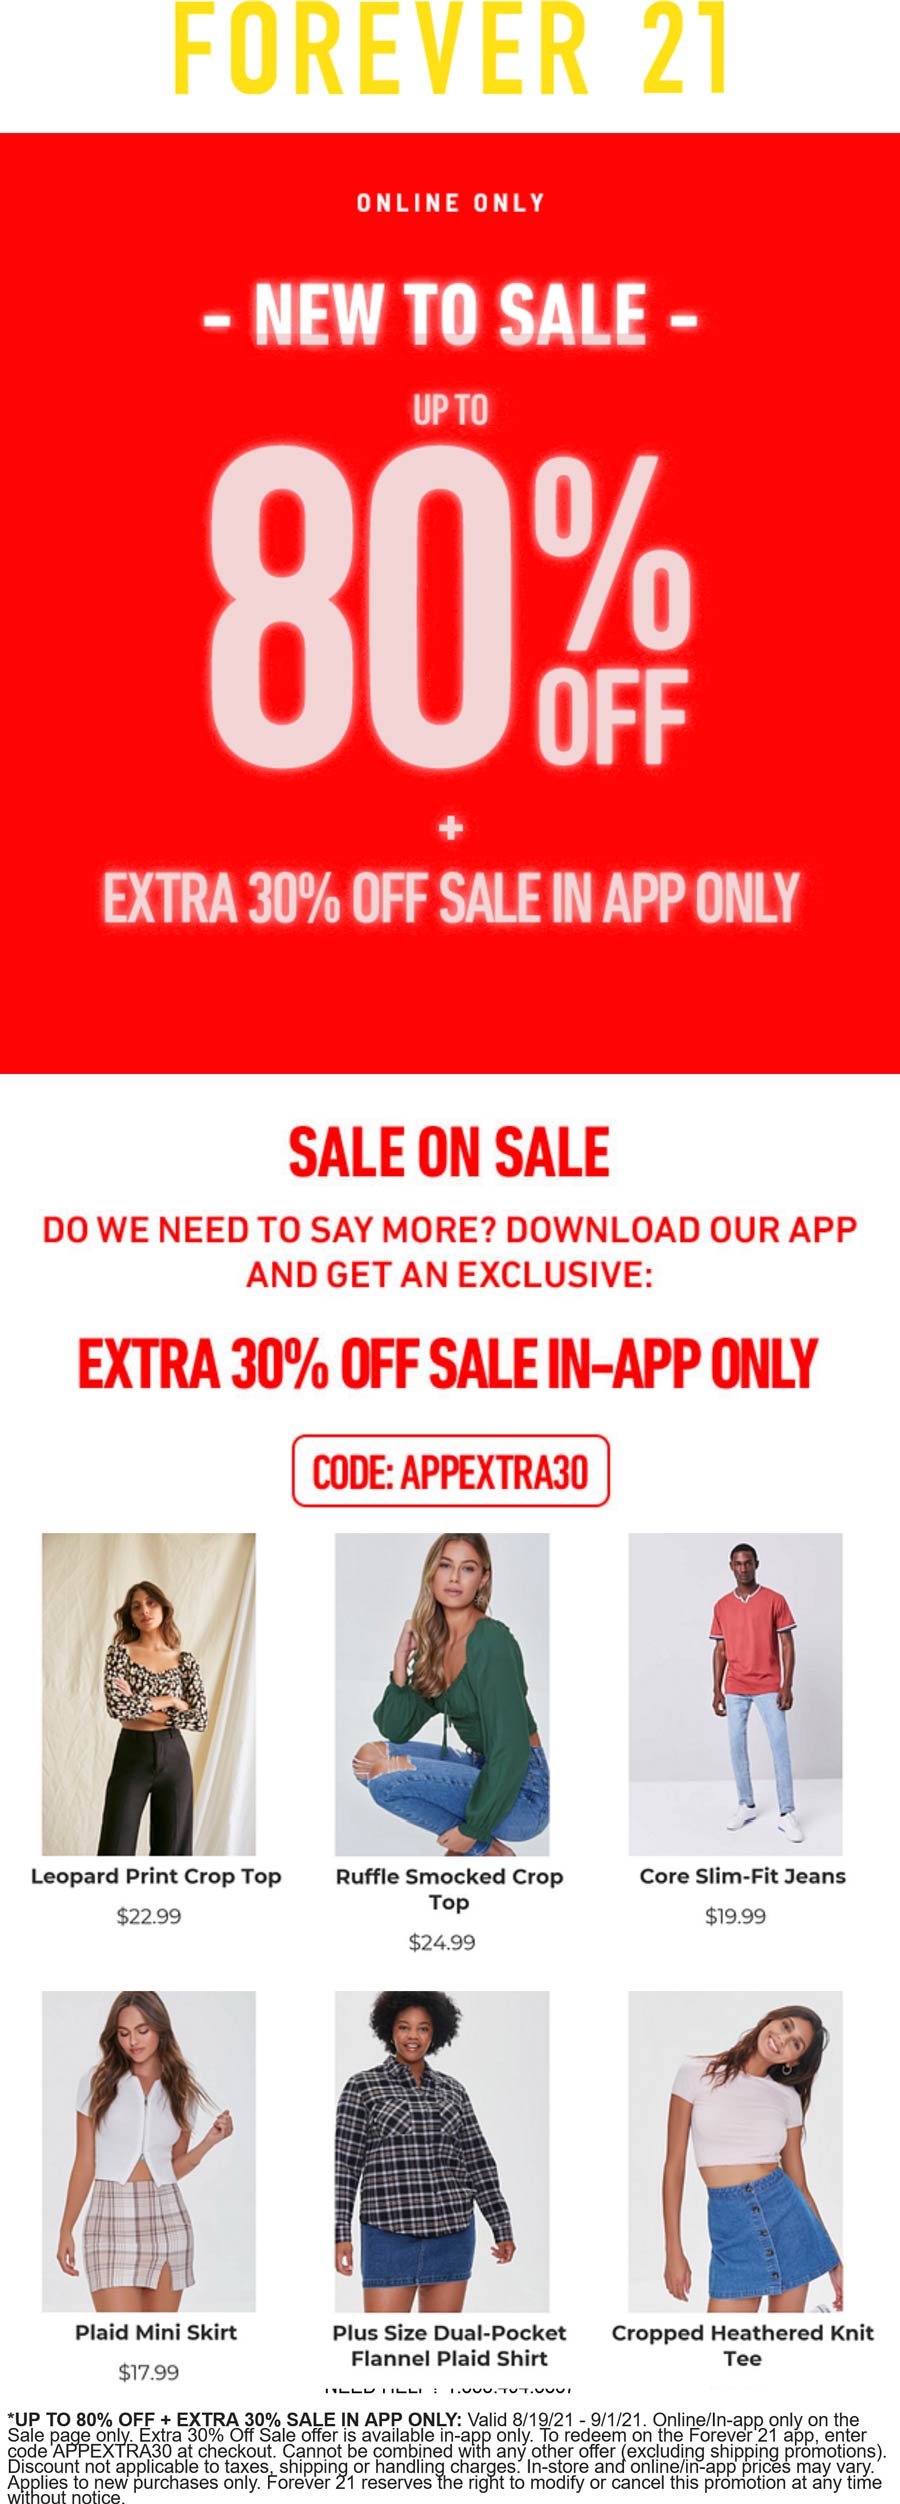 Forever 21 stores Coupon  Extra 30% off sale items at Forever 21 via promo code APPEXTRA30 #forever21 